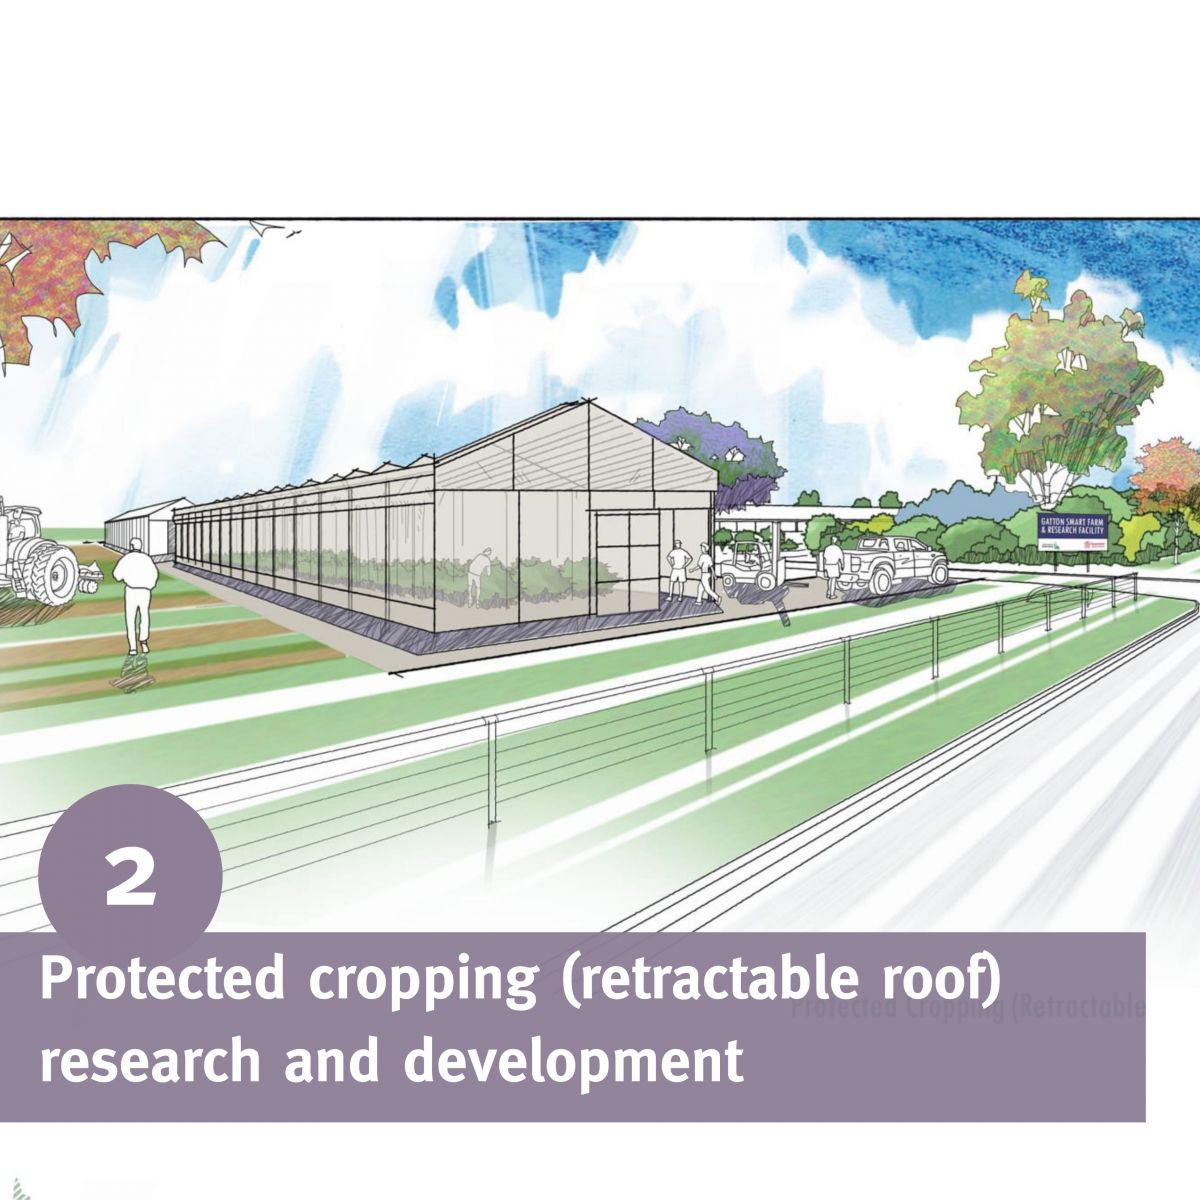 Retractable roof cropping research and development centre